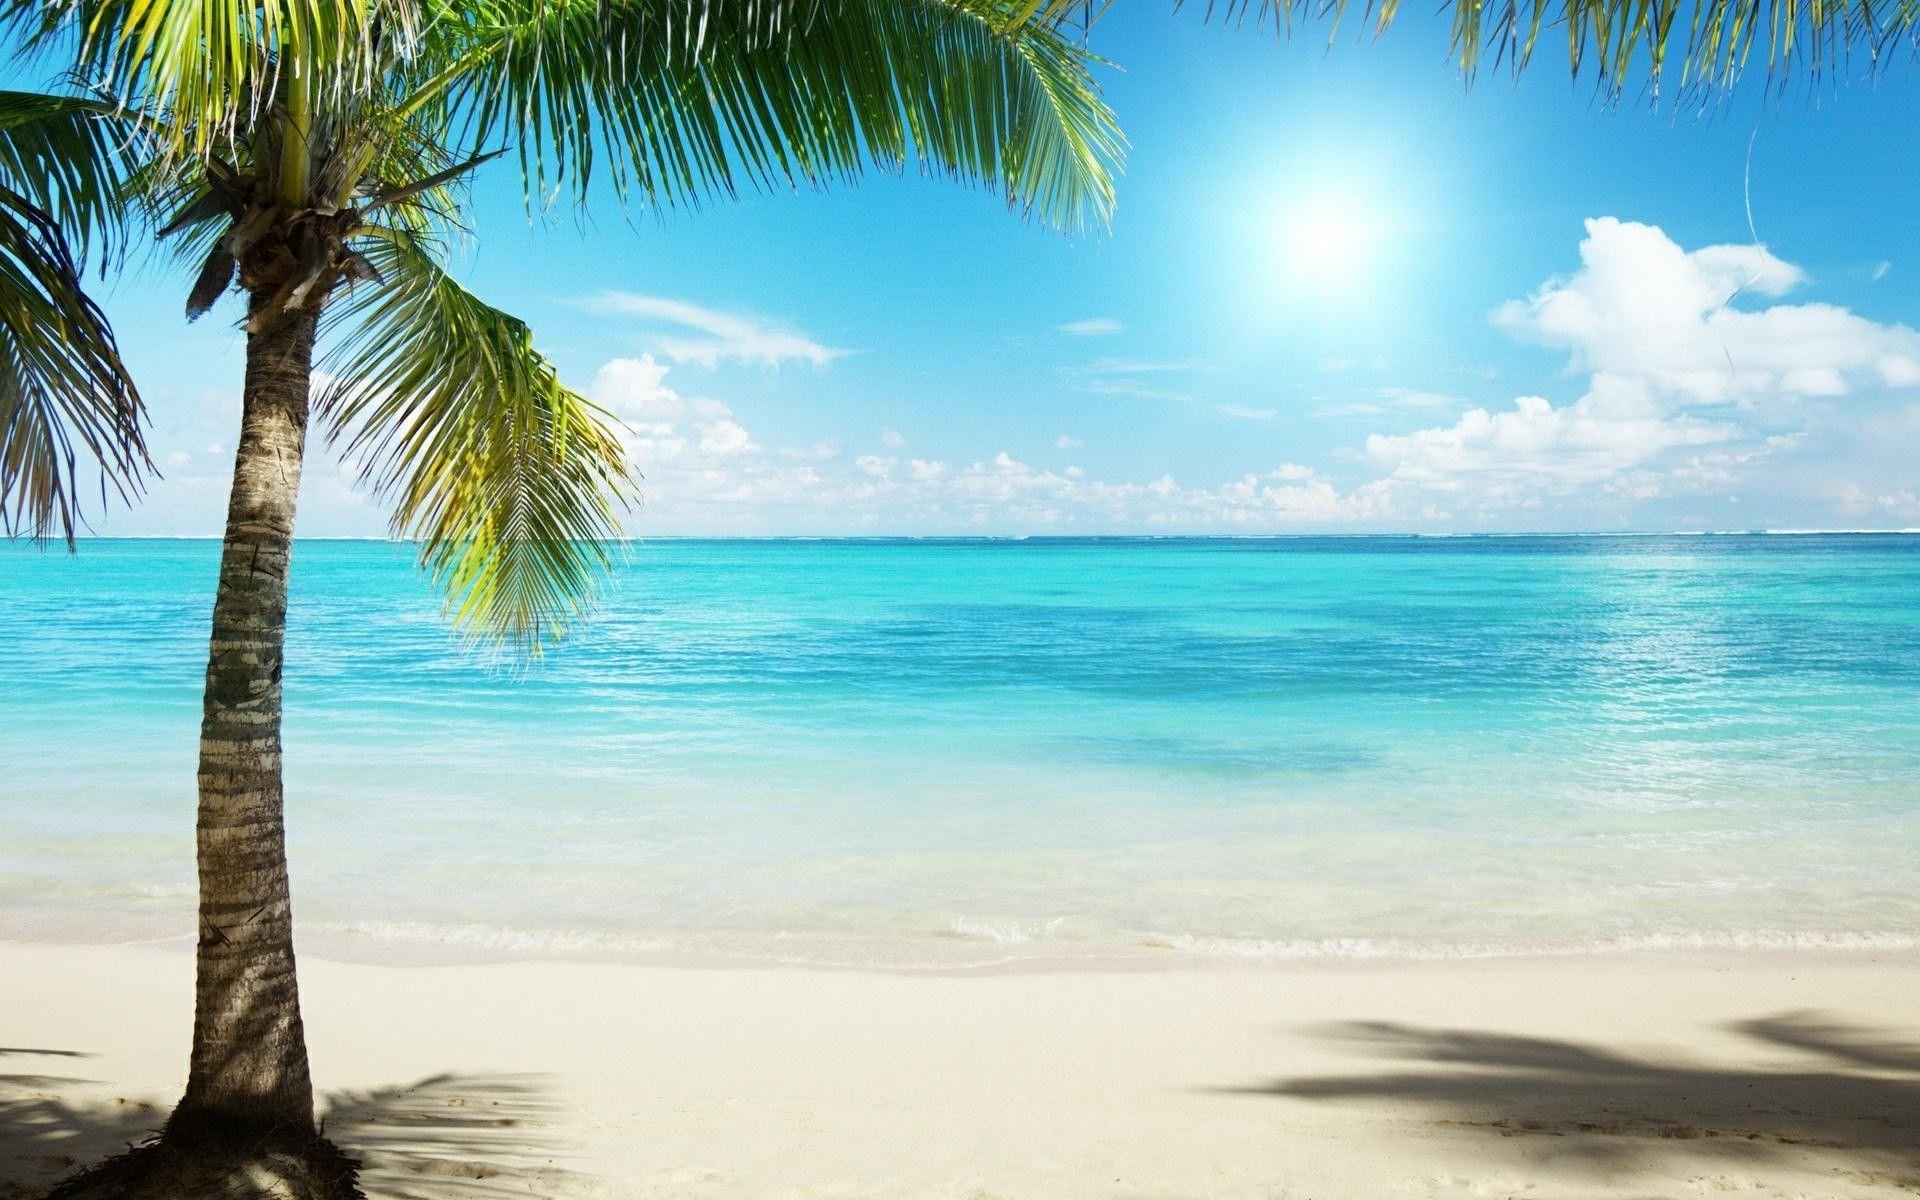 Tropical Background Pictures